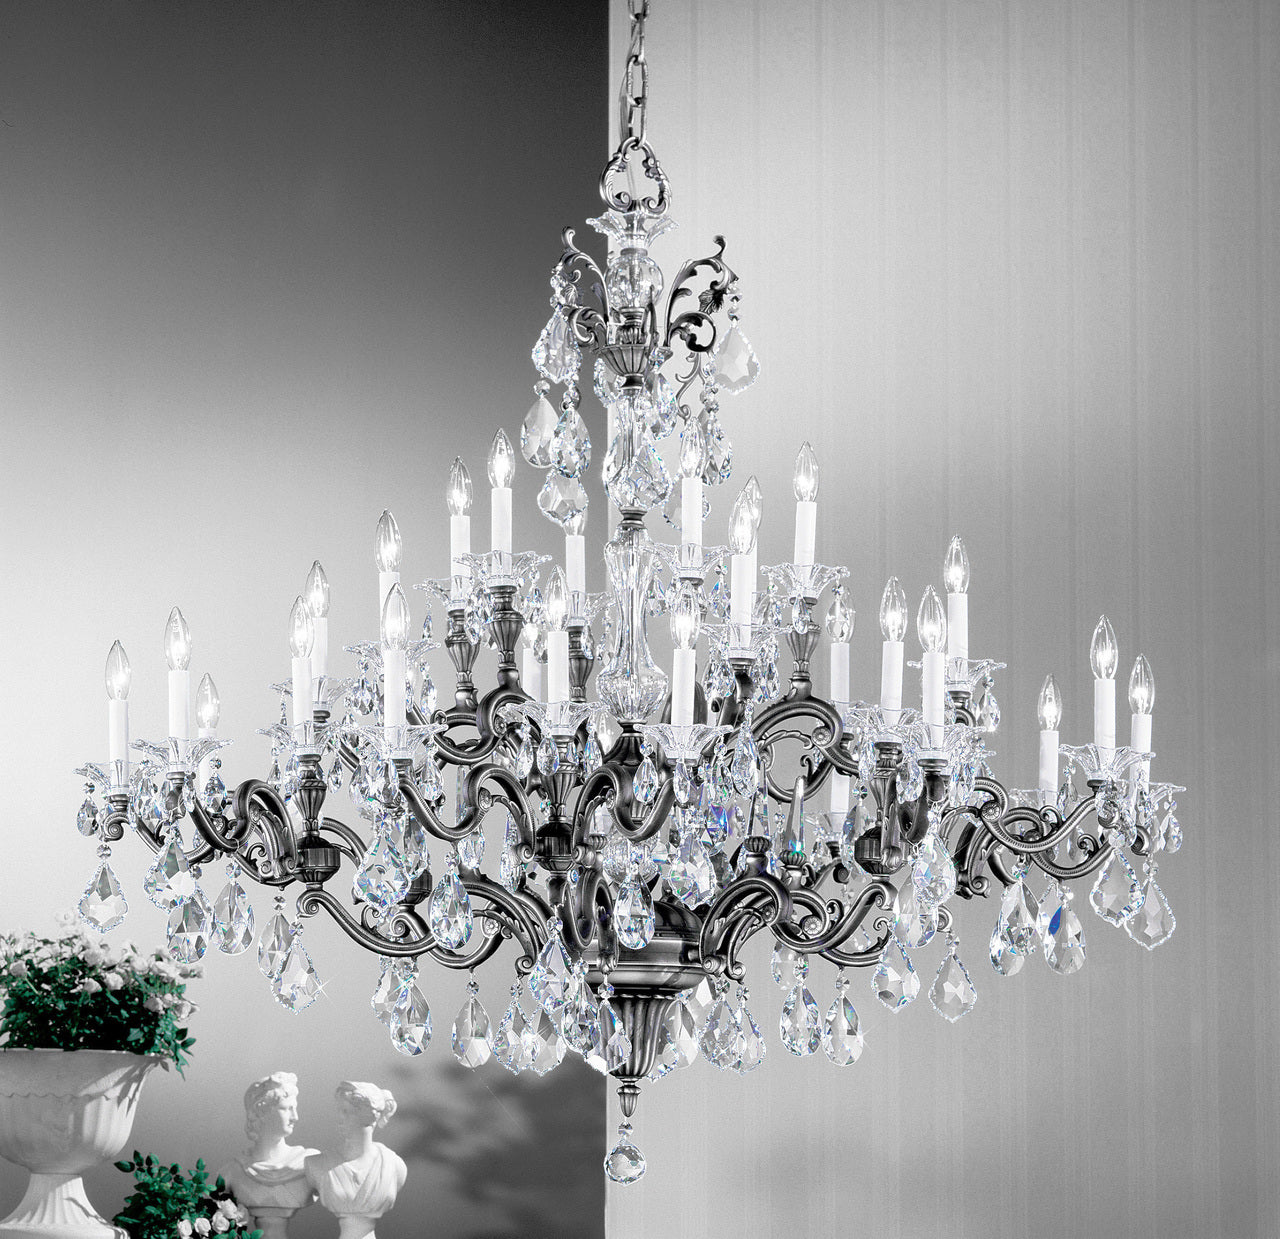 Classic Lighting 57130 MS S Via Firenze Crystal Chandelier in Millennium Silver (Imported from Spain)